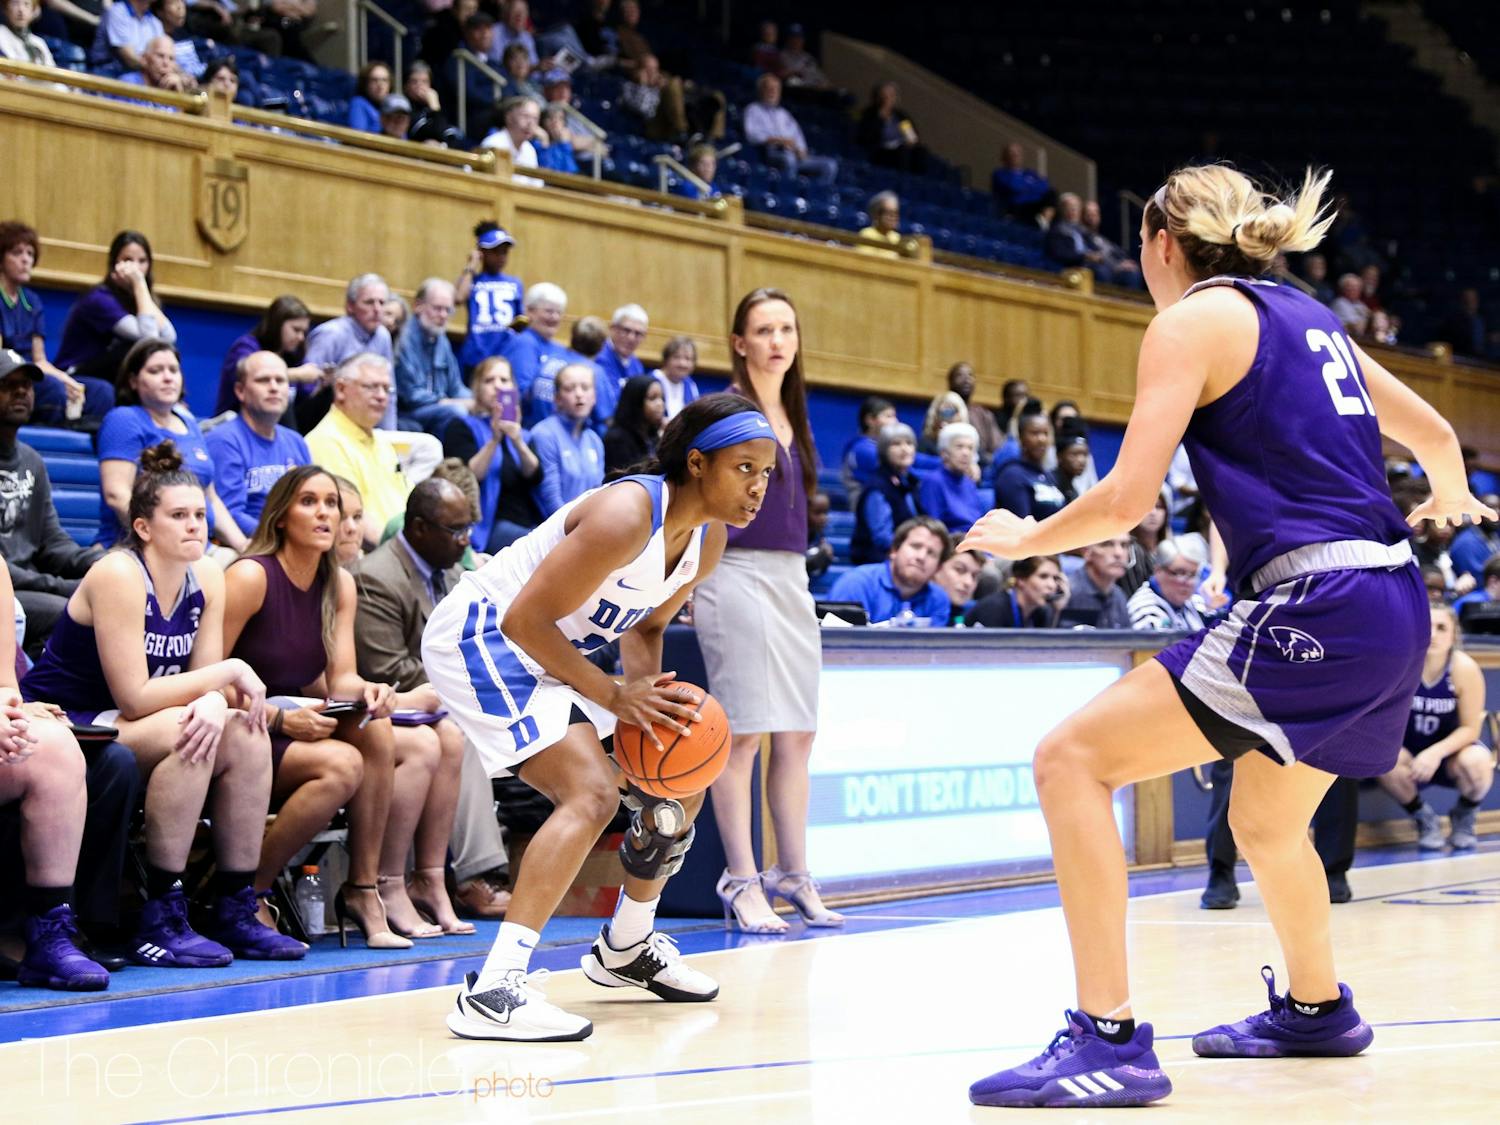 Duke Women's Basketball played High Point in Cameron on November 5, 2019. &nbsp;Duke won the contest with a final score of 93-57. &nbsp;Duke will next face No.6 Texas A&amp;M on the road on November 10, 2019.

Photos of the game were taken by Eric Wei and Rebecca Schneid.